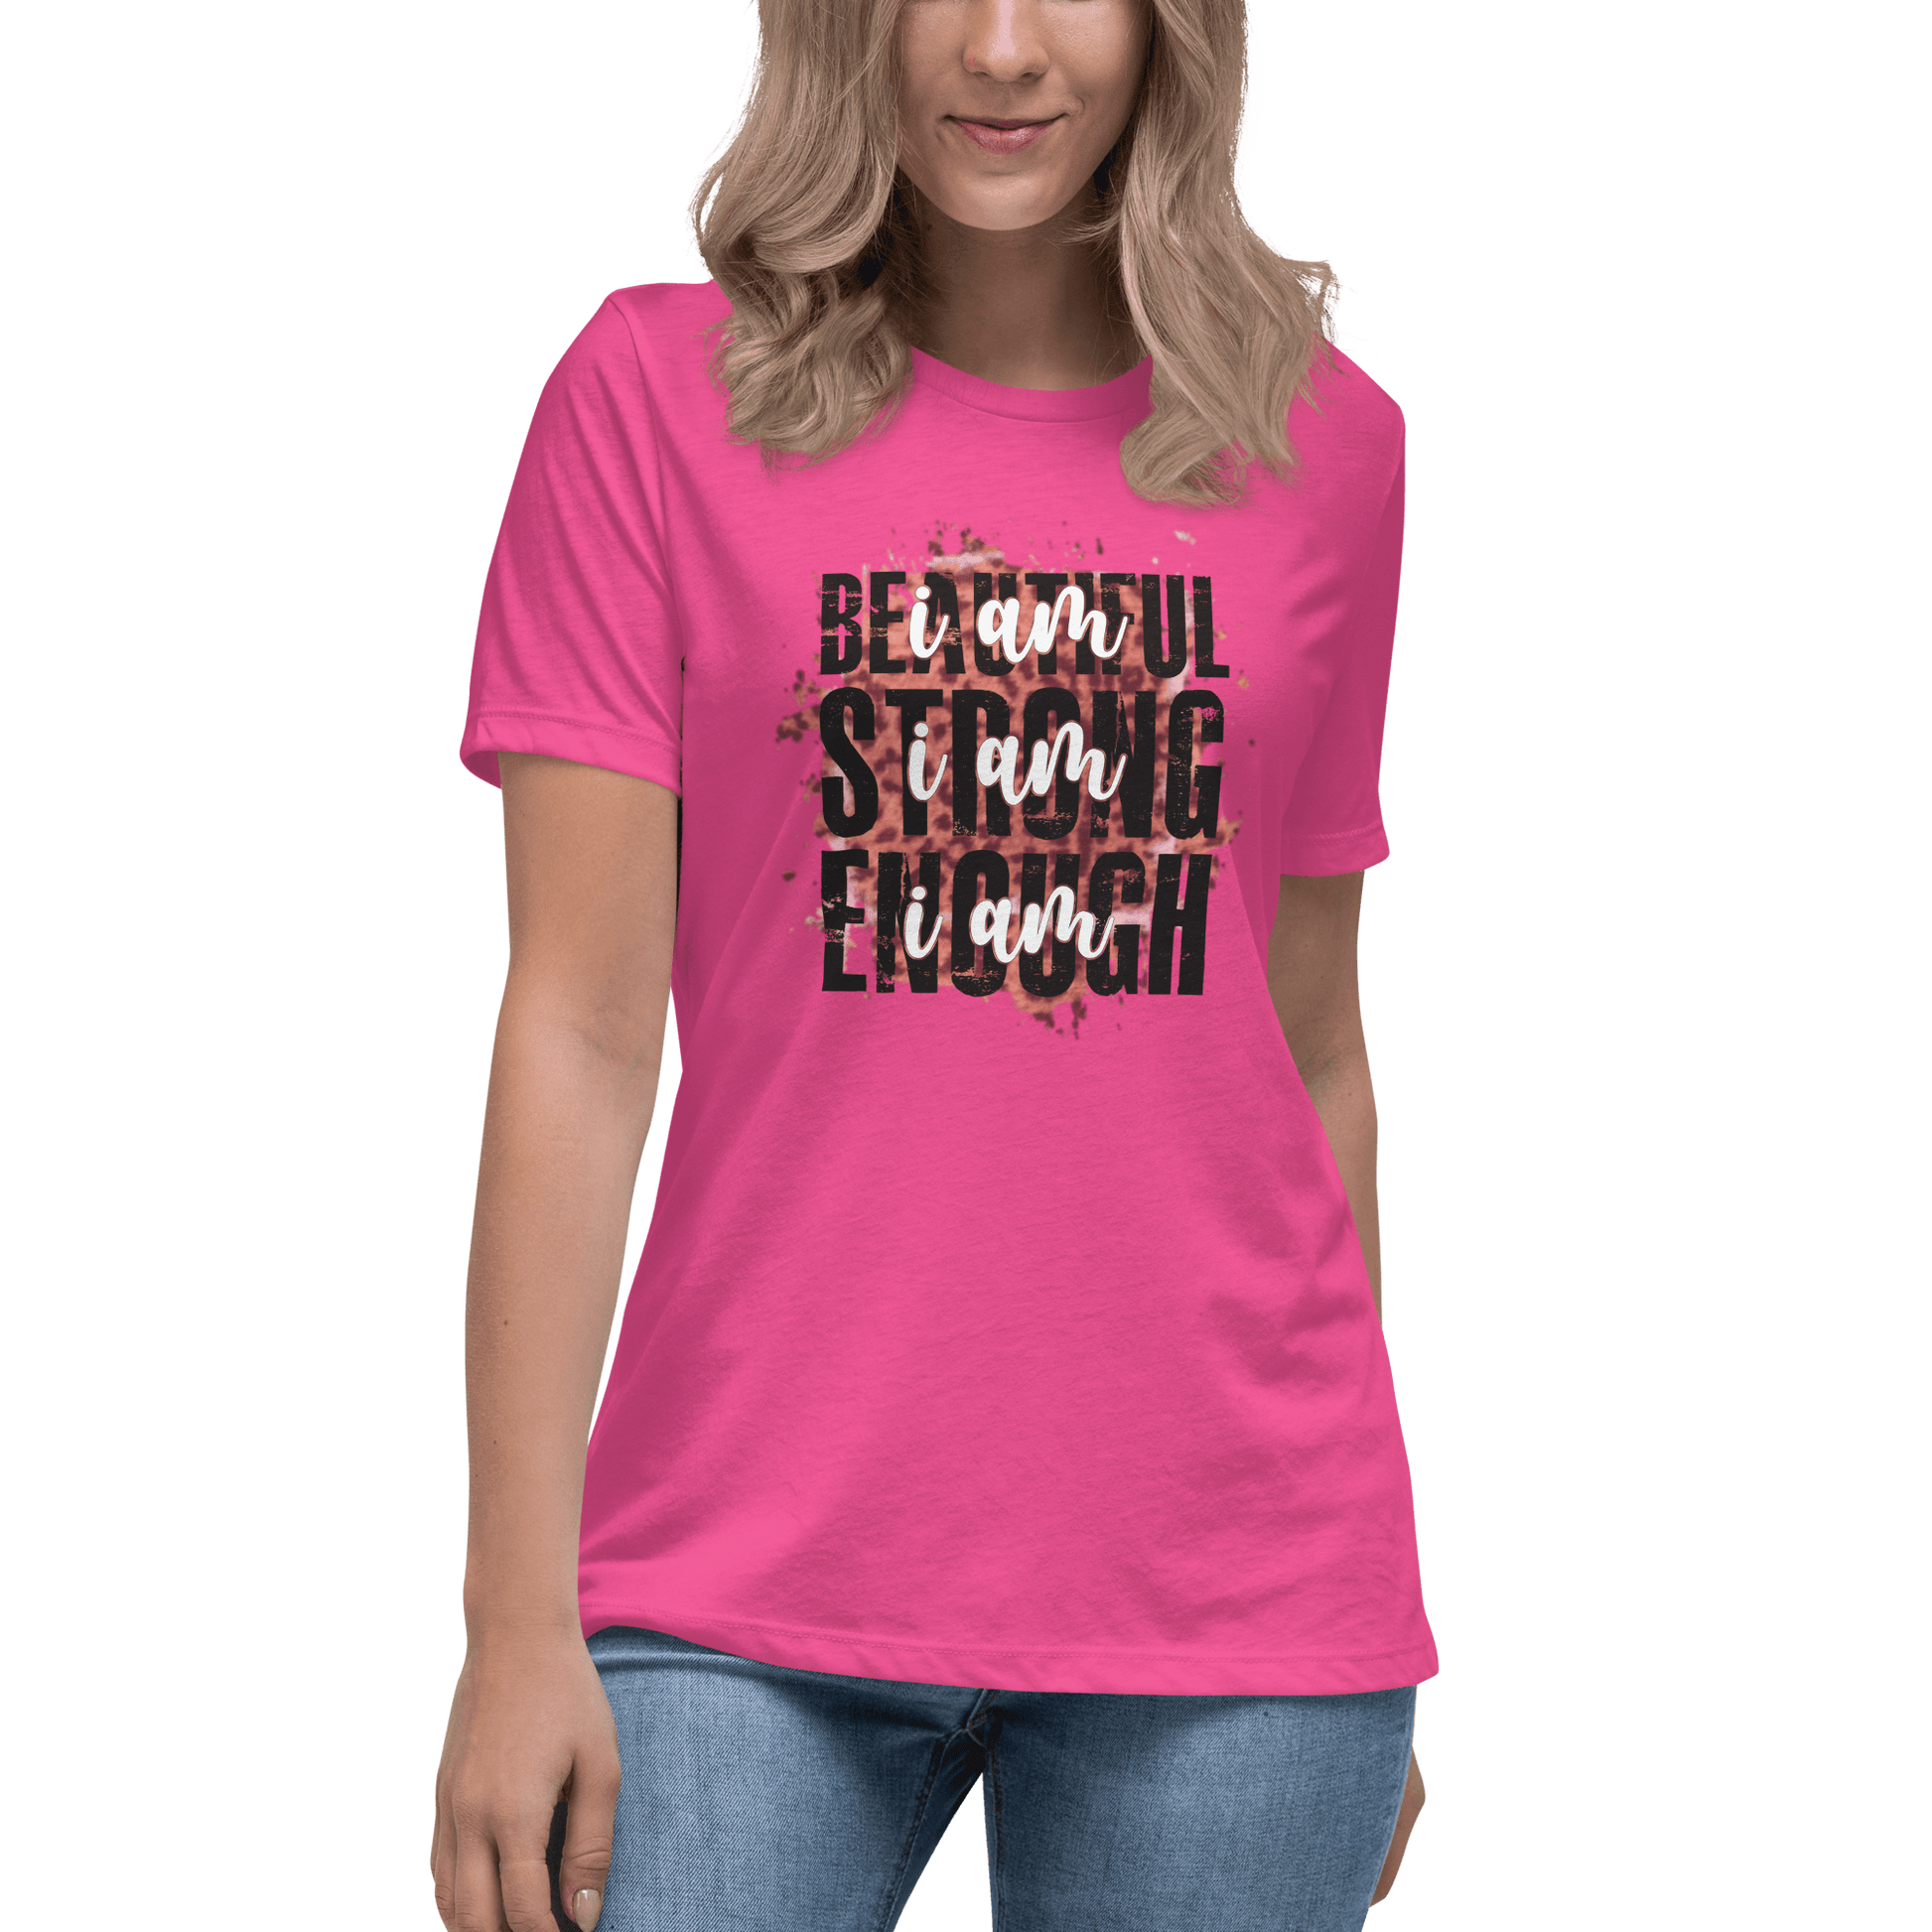 Beautiful Strong Enough Relaxed T-Shirt - L & M Kee, LLC